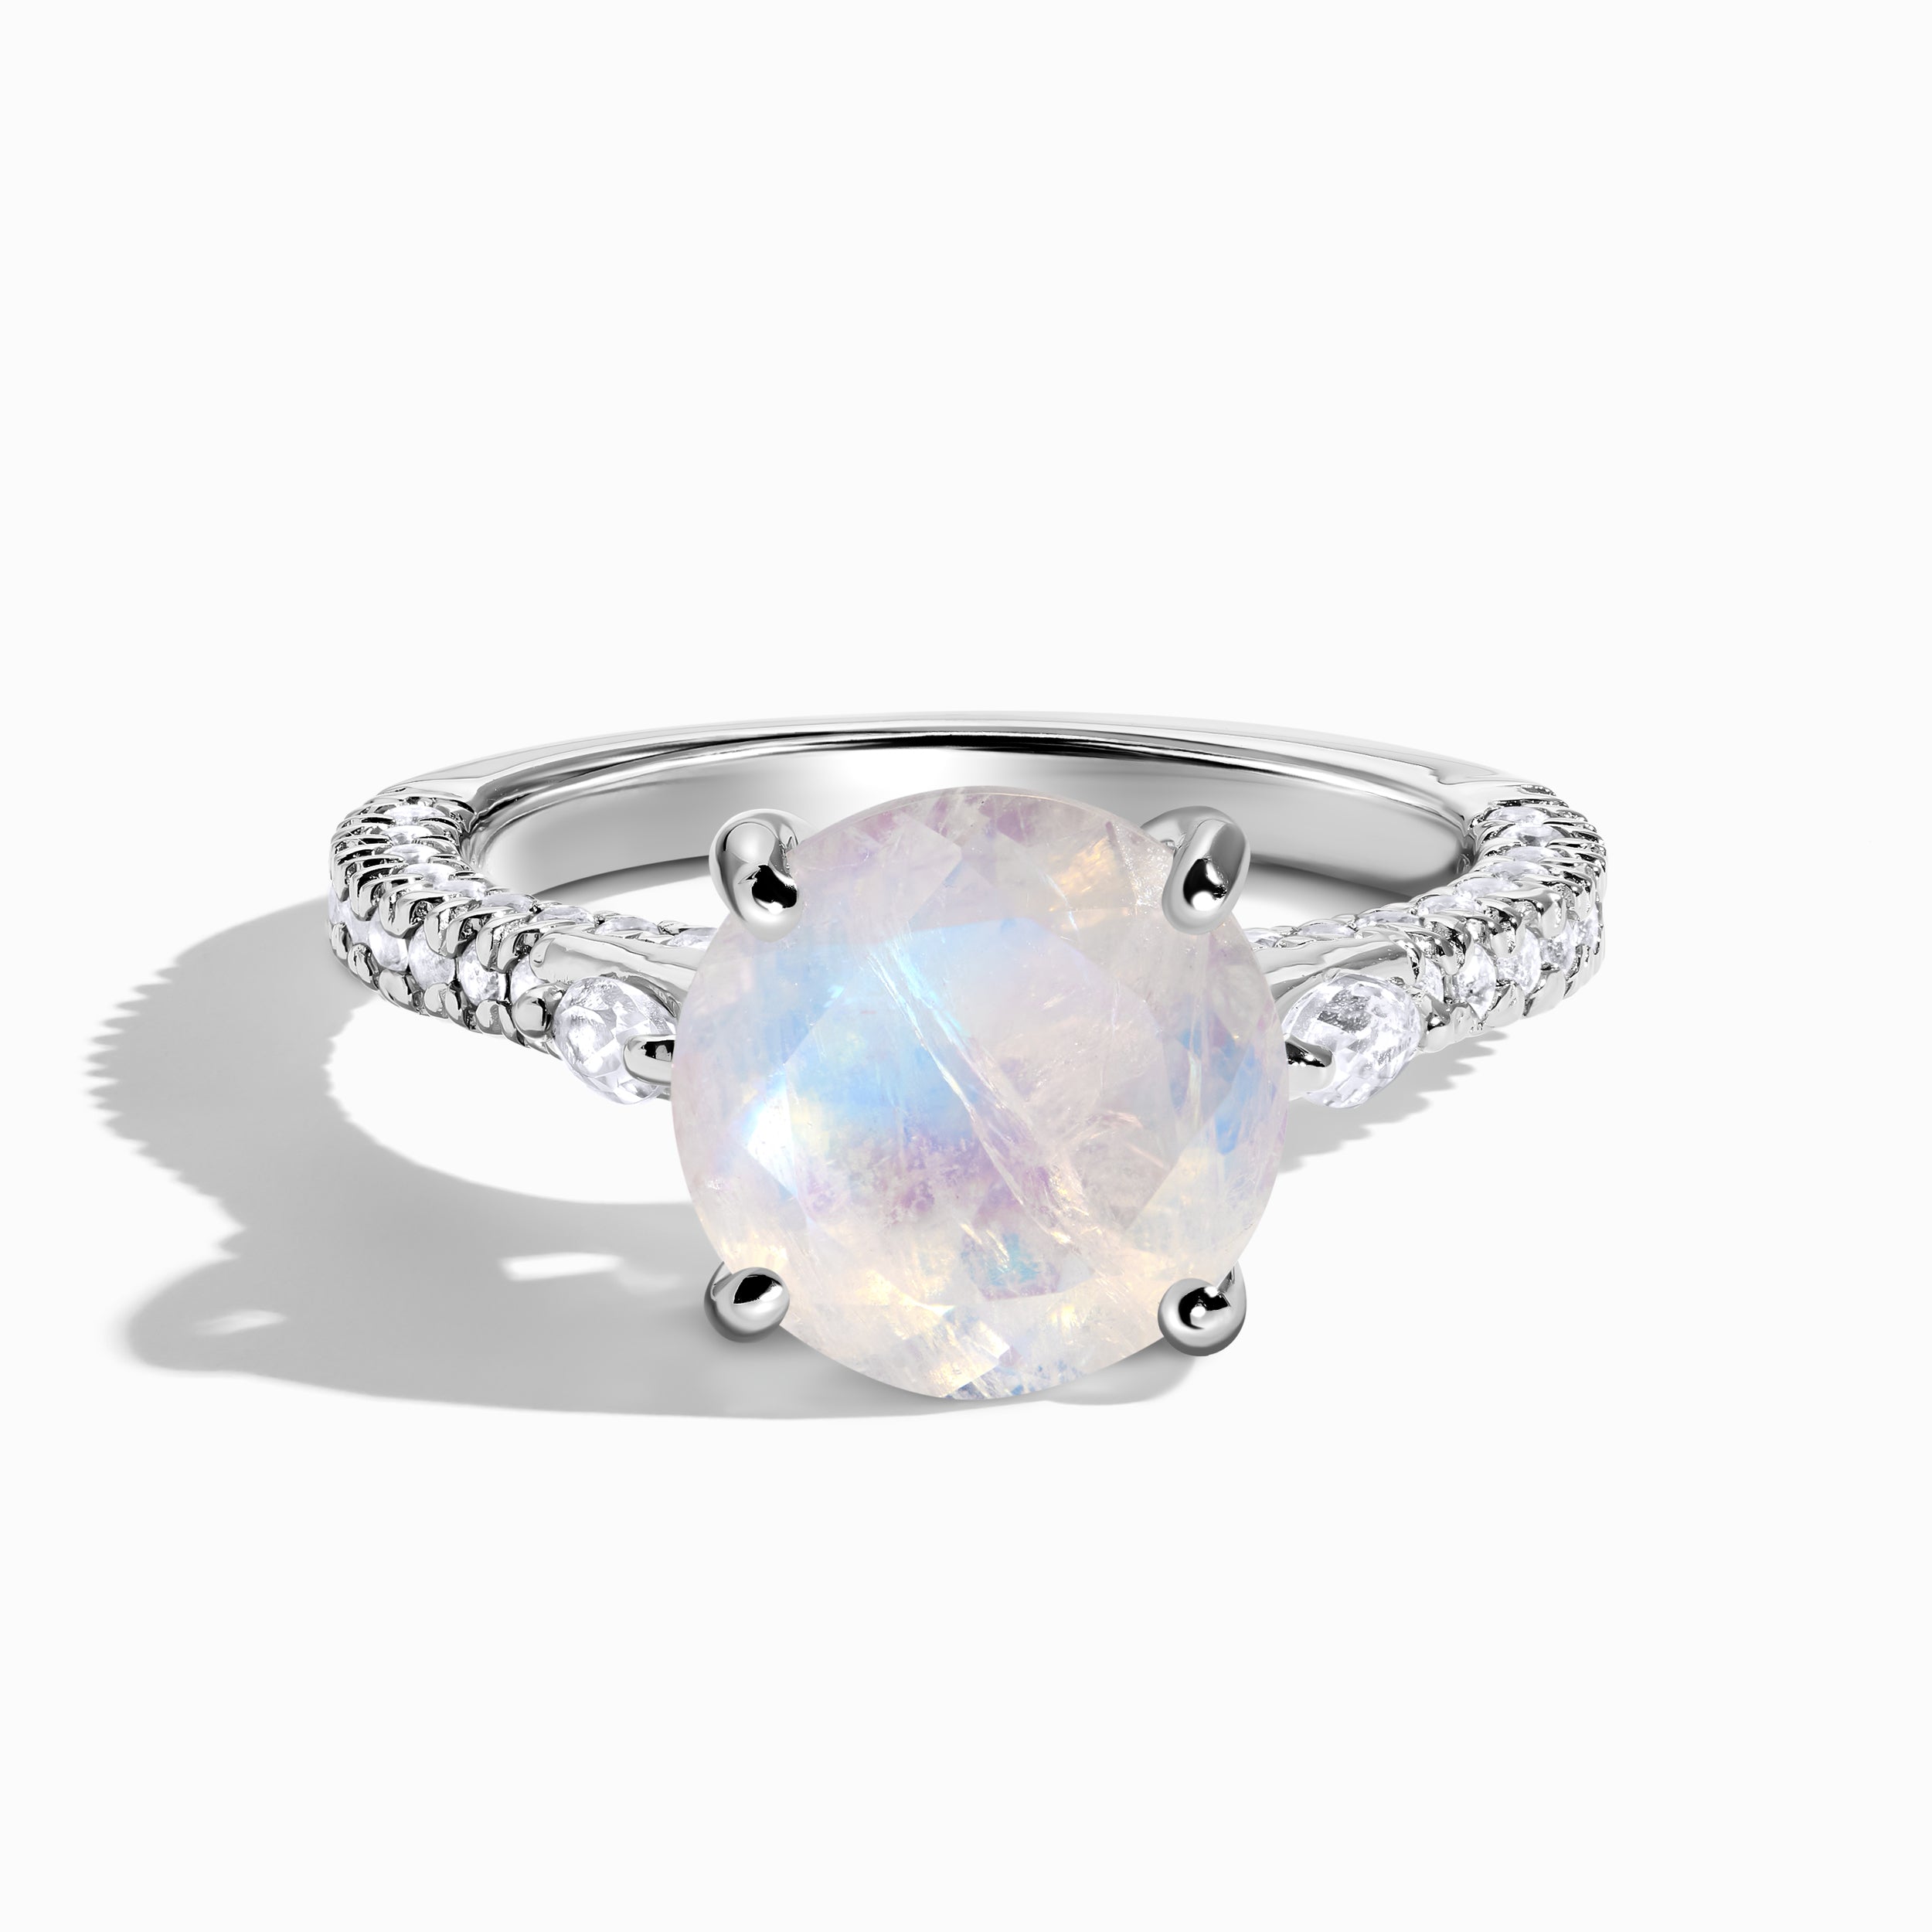 Amazon.com: Moonstone Engagement Ring - Solid 14K White Gold Victorian Moonstone  Engagement Ring - Vintage Inspired Moonstone Ring - Rainbow Moonstone Ring  : Handmade Products